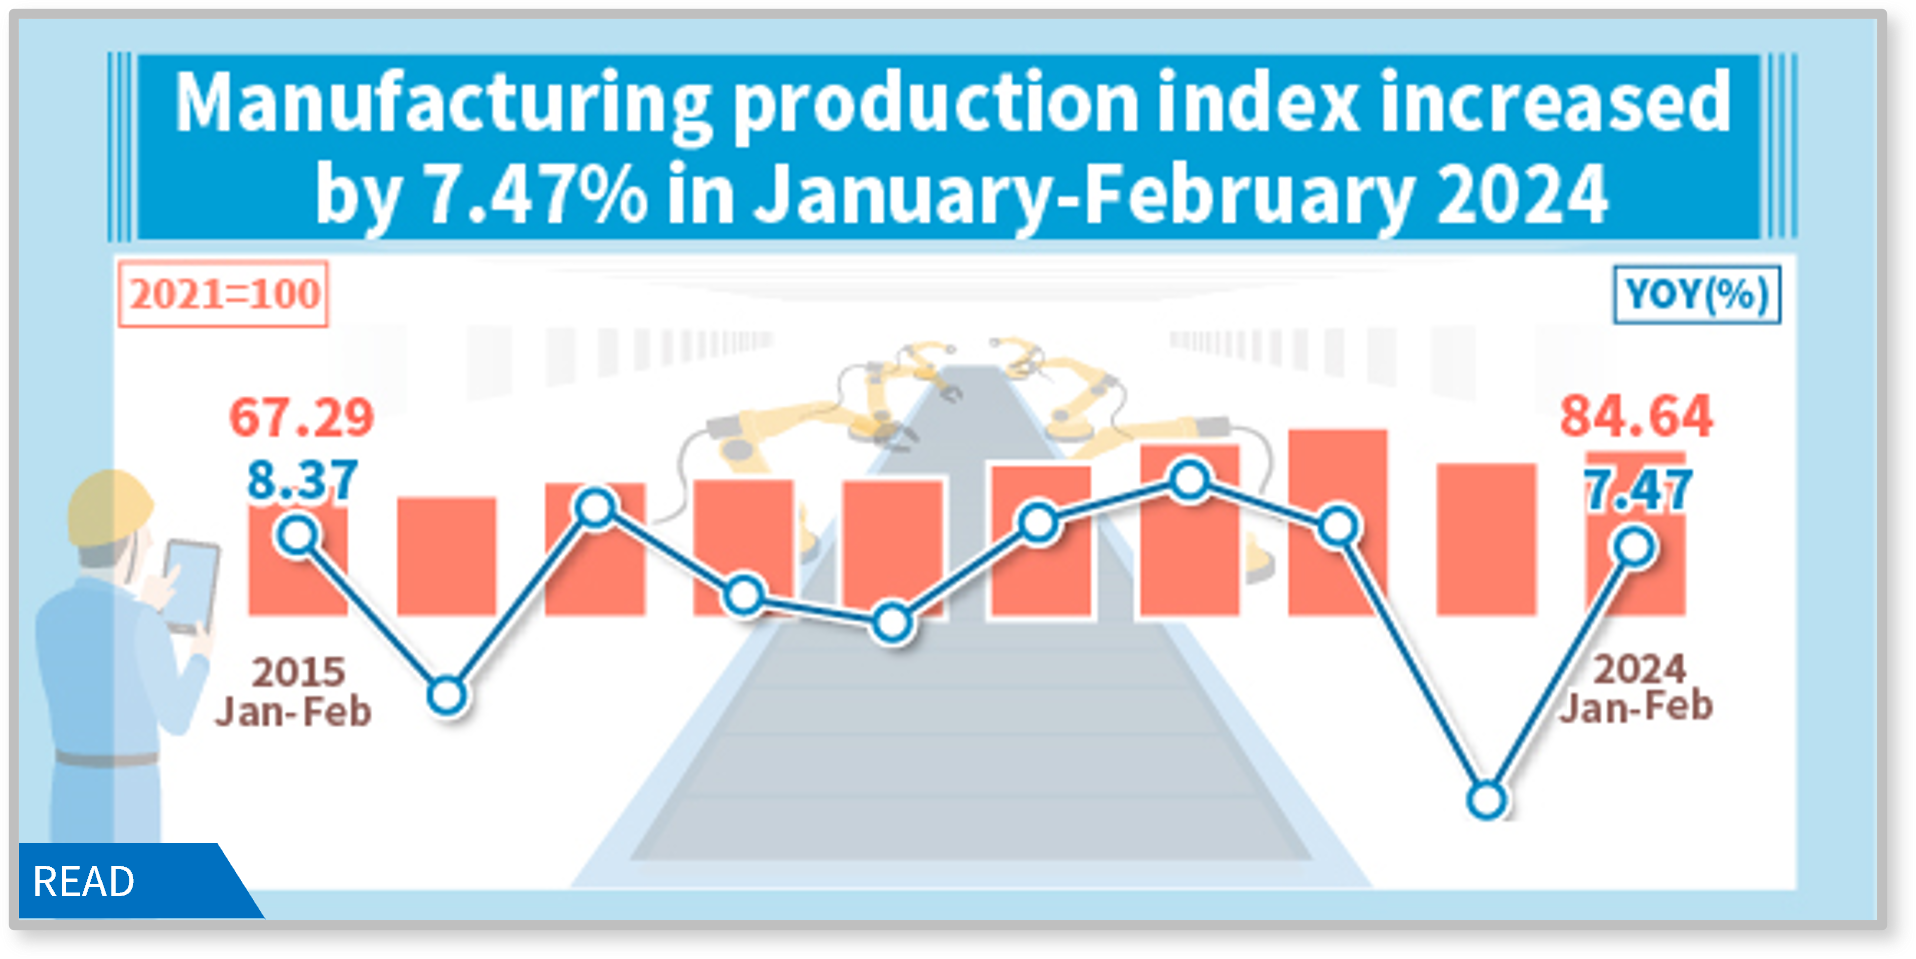 Manufacturing production index increased by 7.47% in January-February 2024